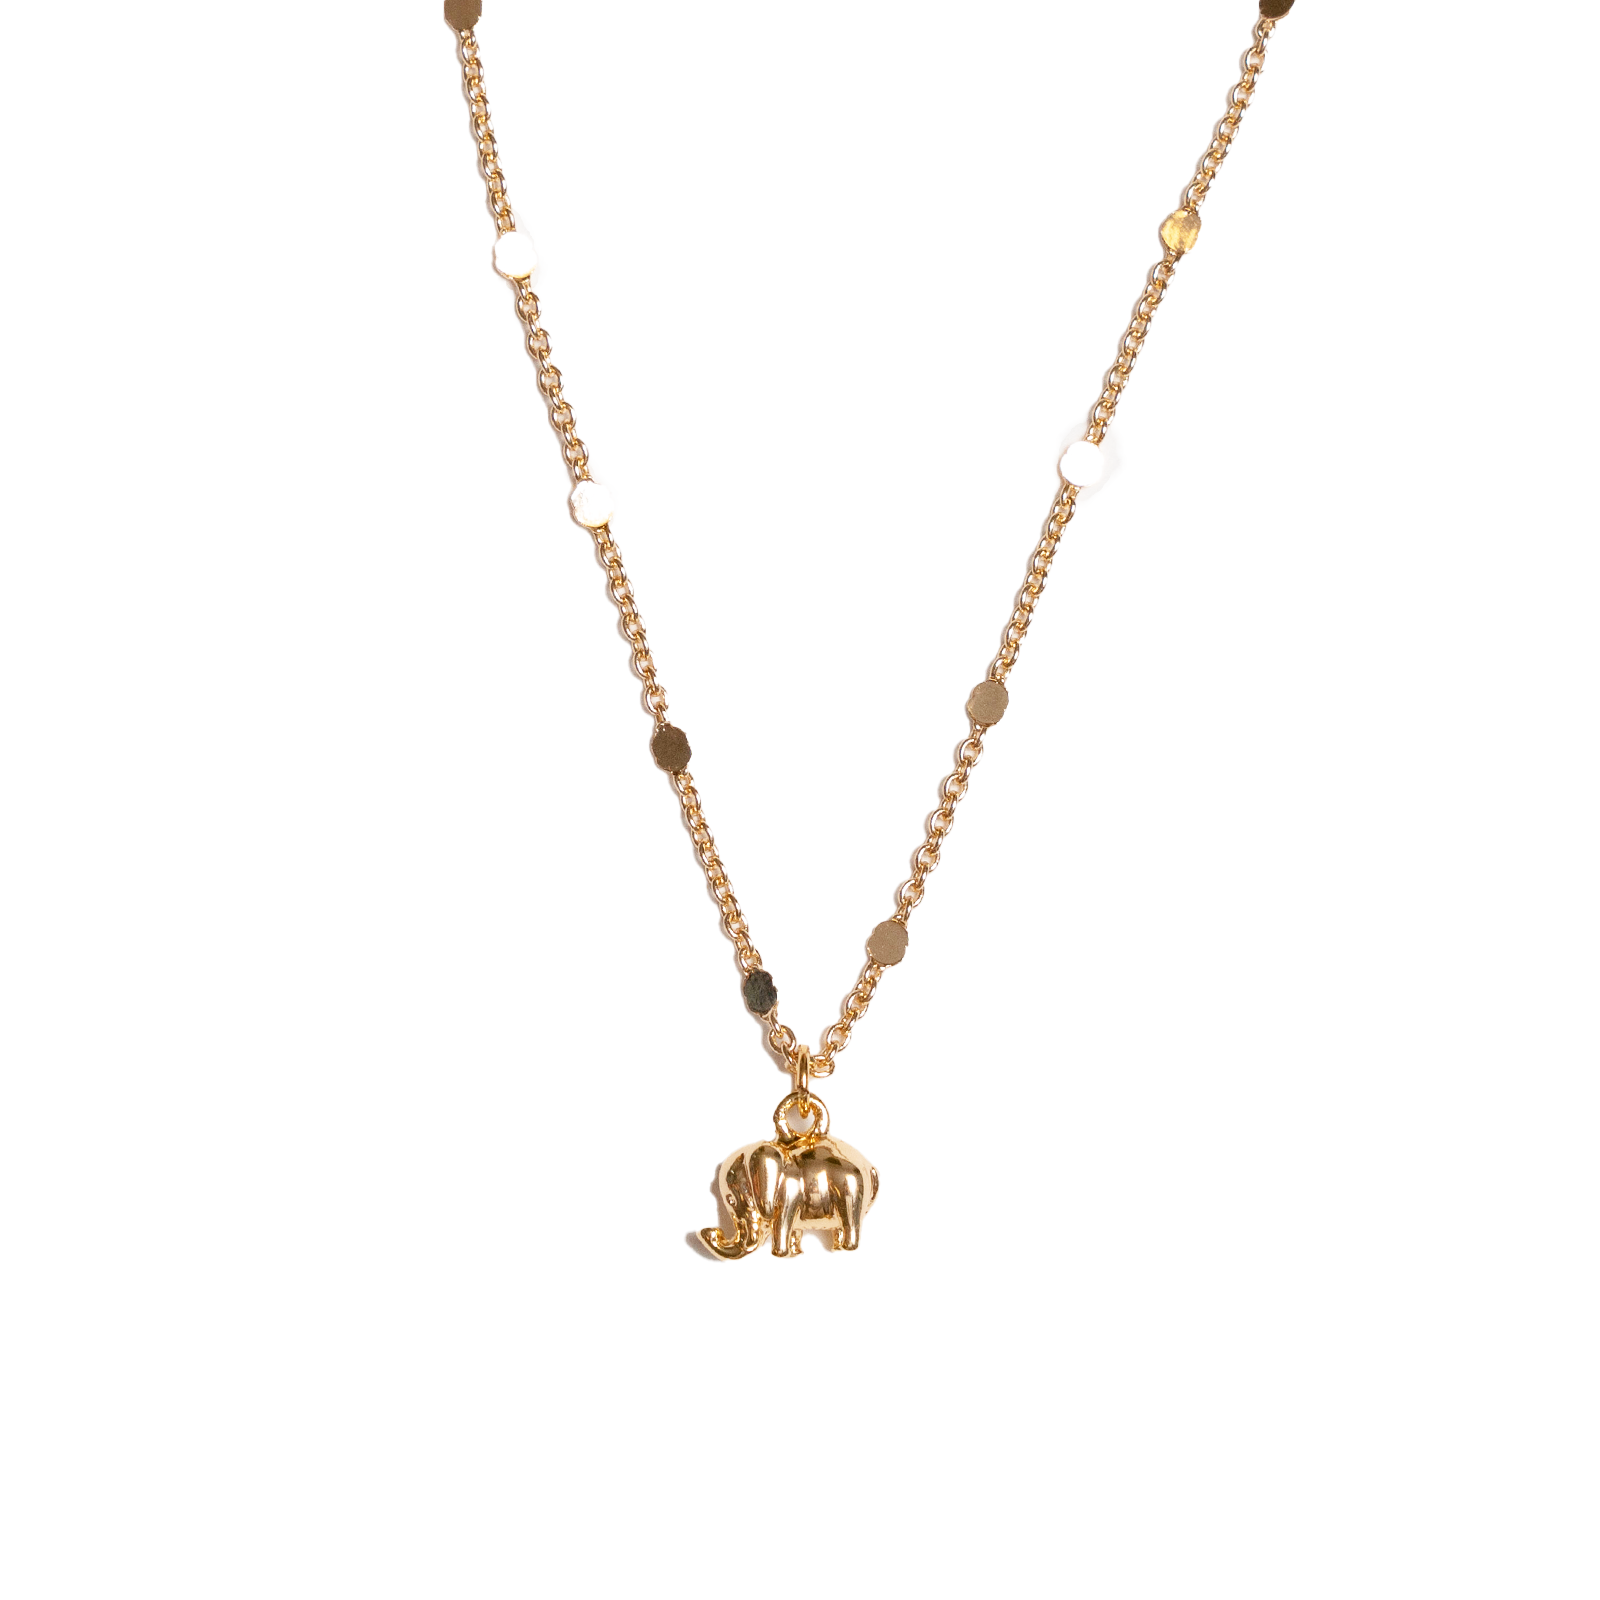 Gold Chain Elephant Necklace Made in Thailand by Lotus and Luna